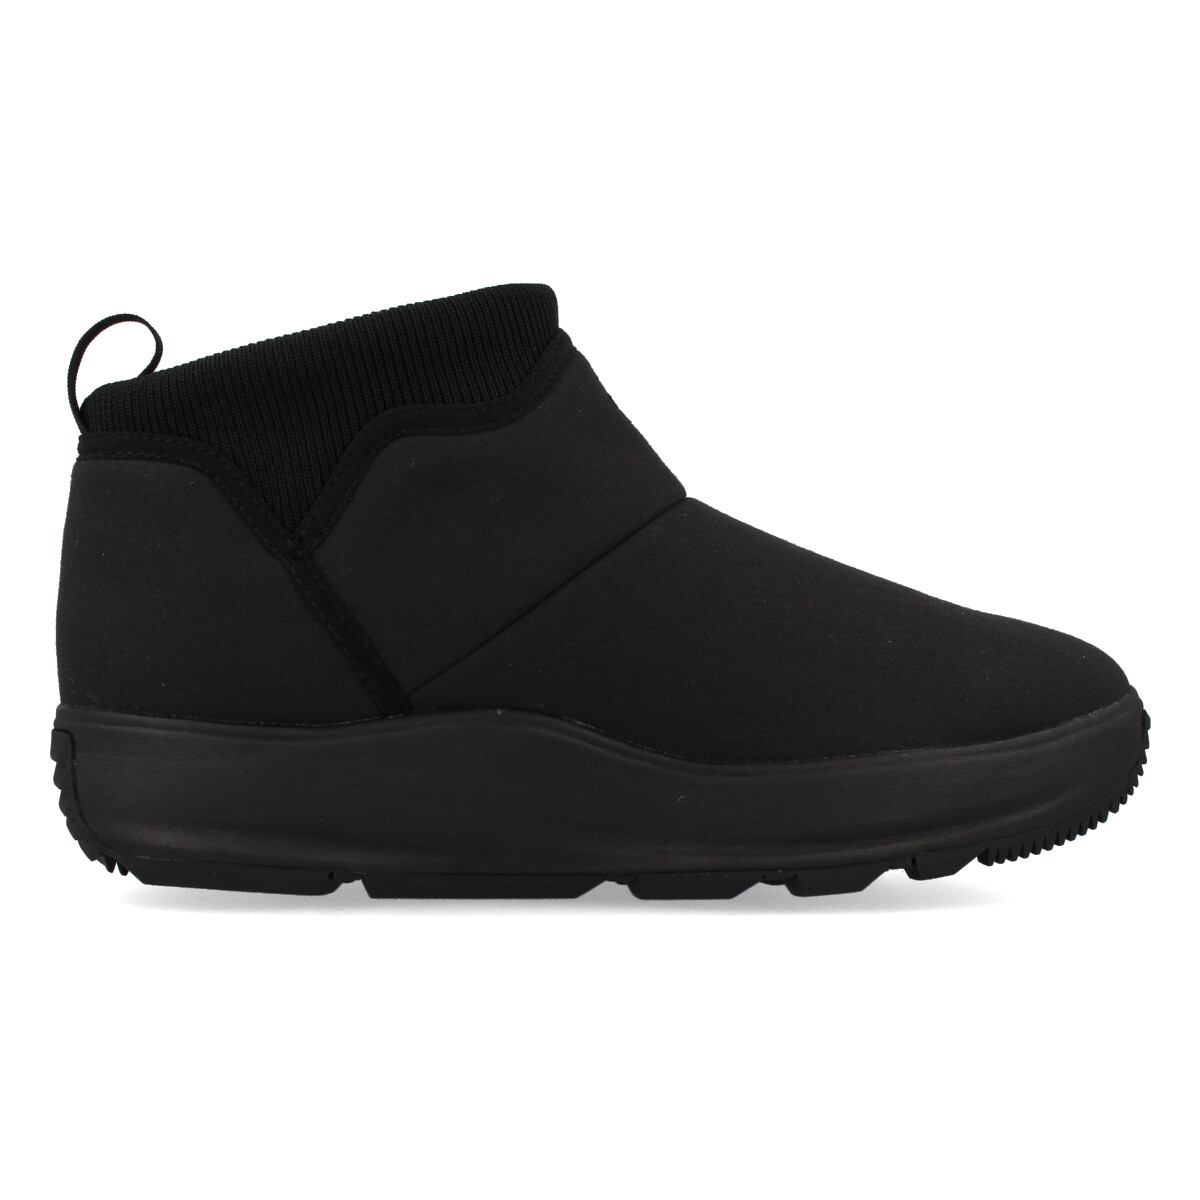 THE NORTH FACE FIREFLY BOOTIE ザ ノース フェイス ファイヤーフライ ブーティー NF52181 | LOWTEX  PLUS